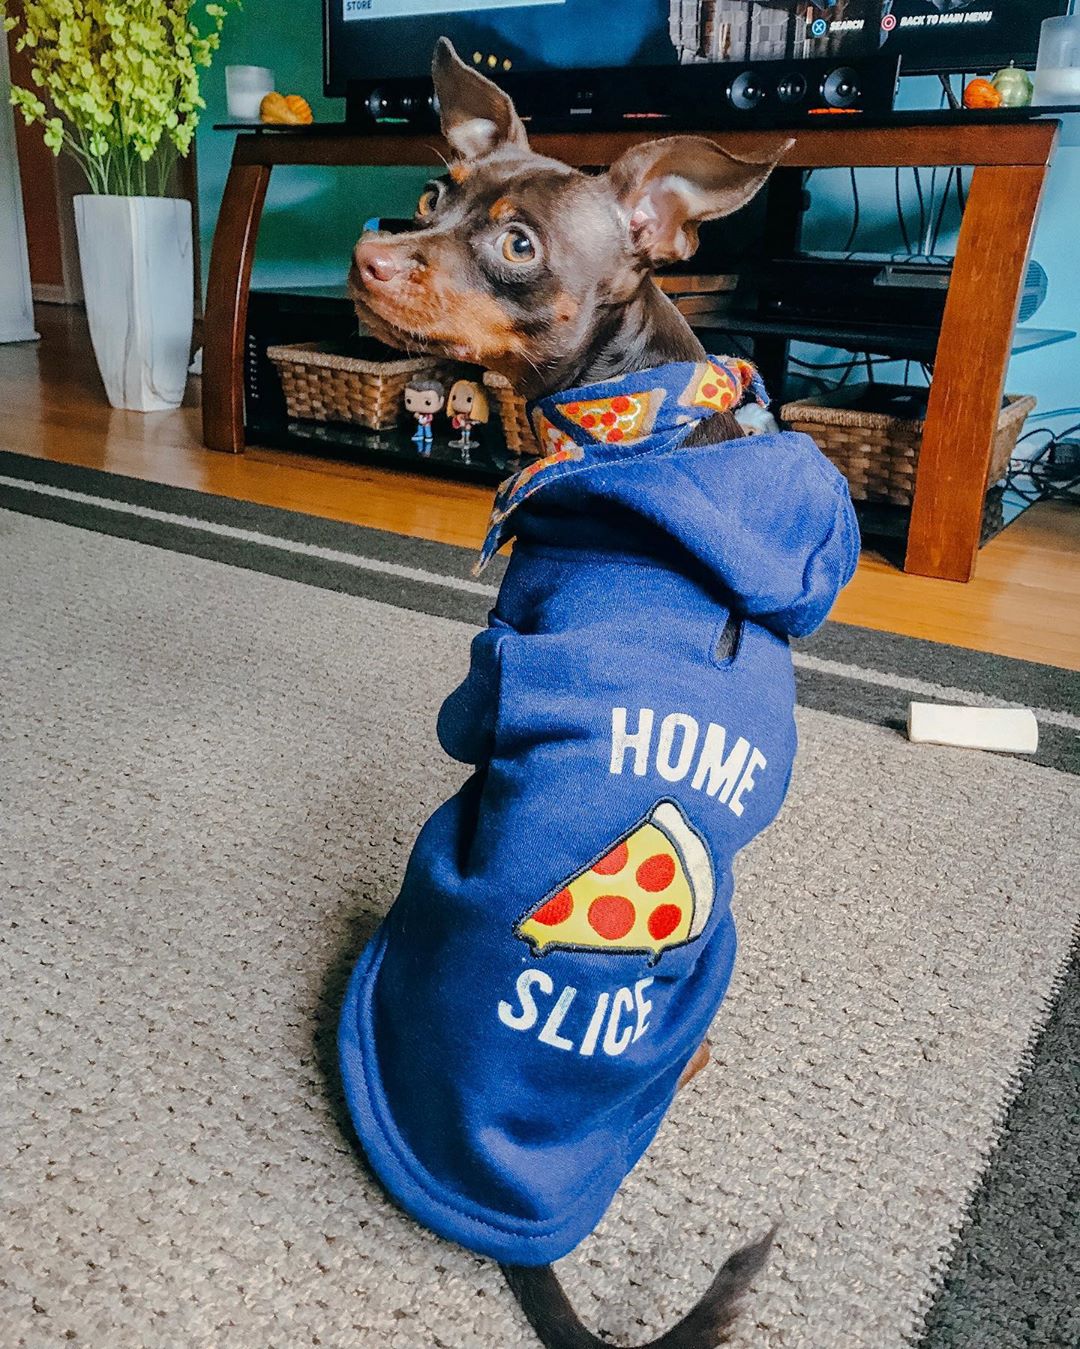 A Miniature Pinscher wearing blue jacket with pizza print while sitting on the carpet